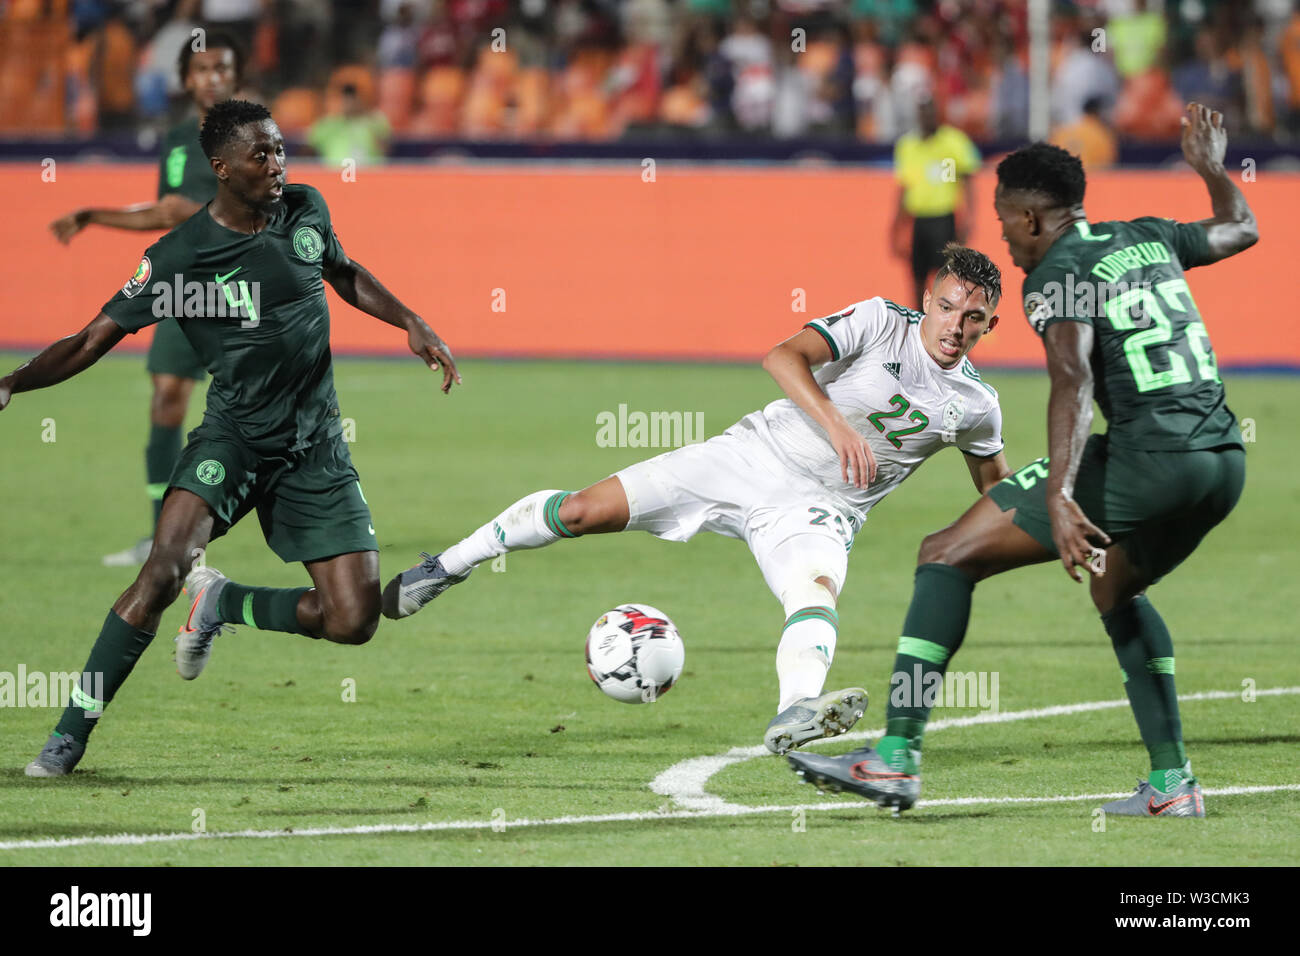 Cairo, Egypt. 14th July, 2019. Algeria's Ismael Bennacer (C) battles for the ball with Nigeria's Wilfred Ndidi (L) and Kenneth Omeruo during the 2019 Africa Cup of Nations semi-final soccer match between Algeria and Nigeria at the Cairo International Stadium. Credit: Oliver Weiken/dpa/Alamy Live News Stock Photo